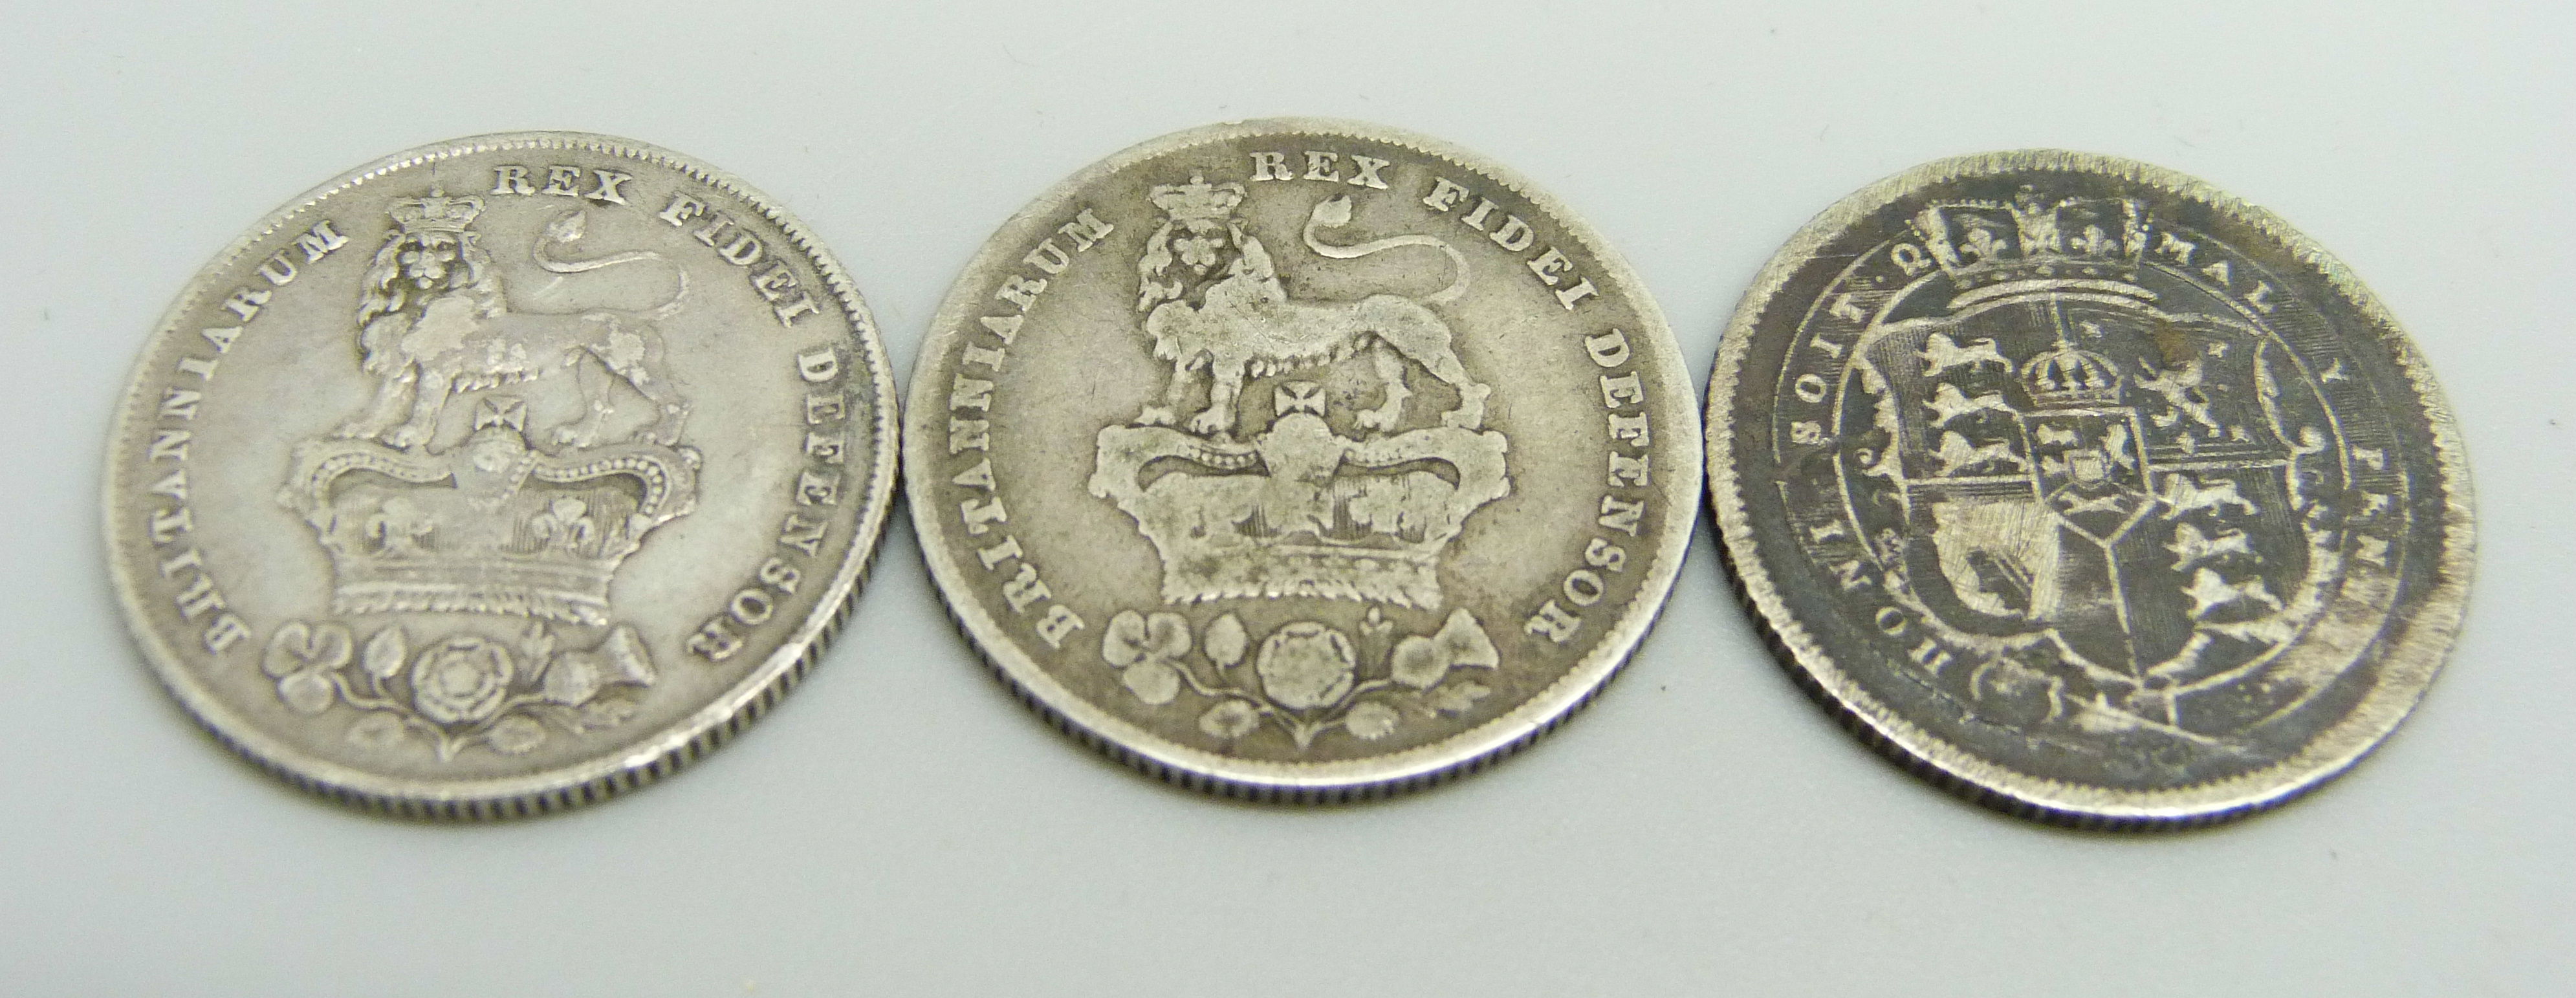 Three one shilling coins, George III 1817 and George IV 1826 and 1829 - Image 2 of 2